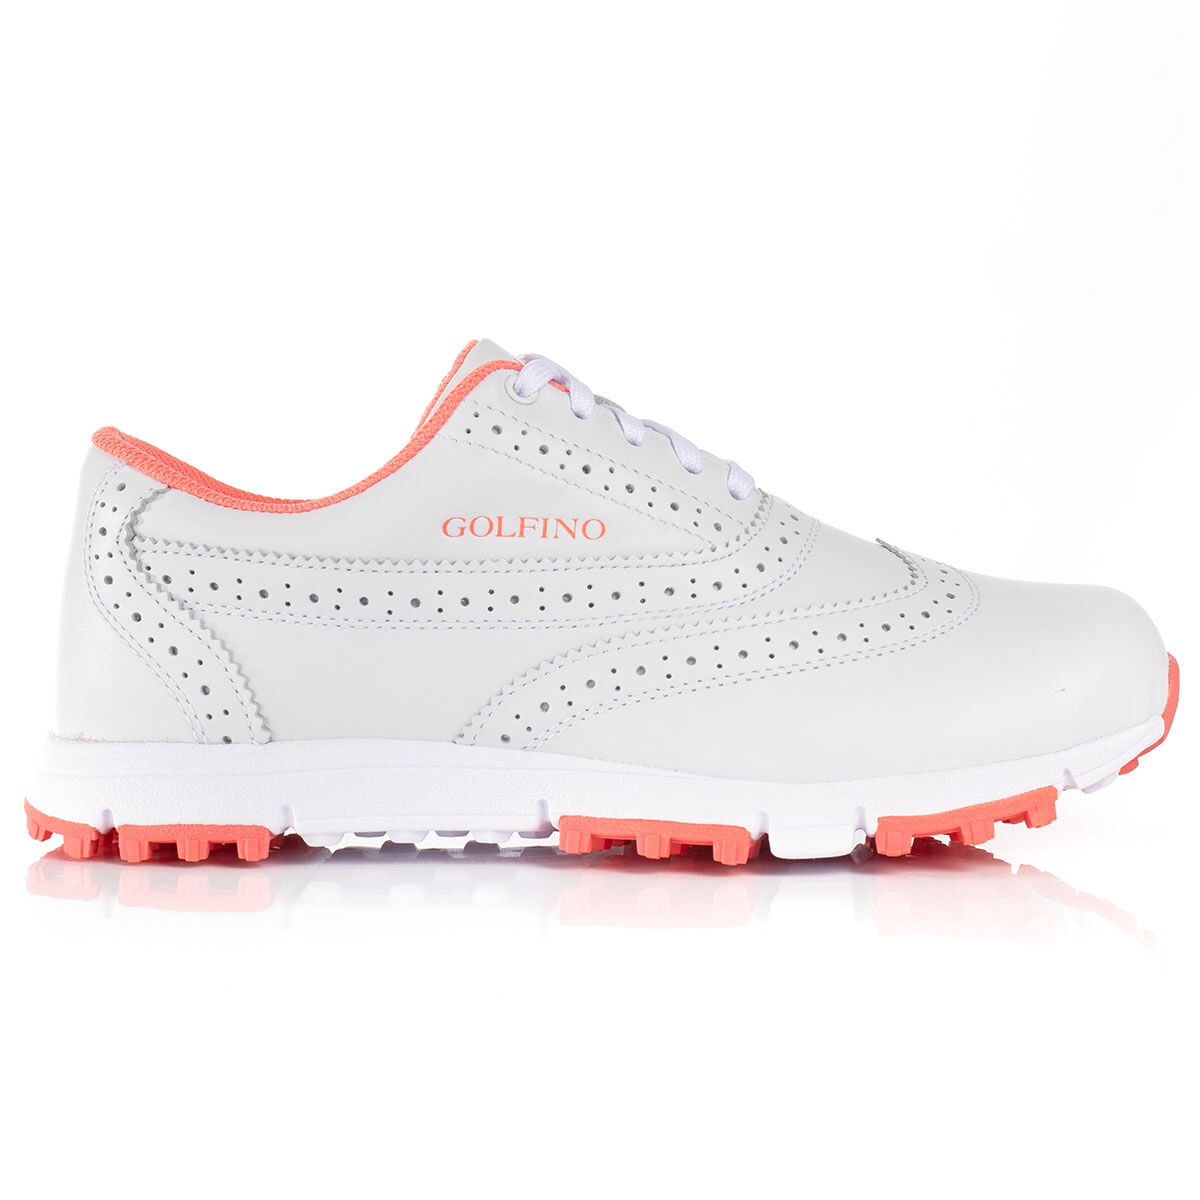 Golfino Womens White and Pink Aurora Spikeless Golf Shoes, Size: 4 | American Golf